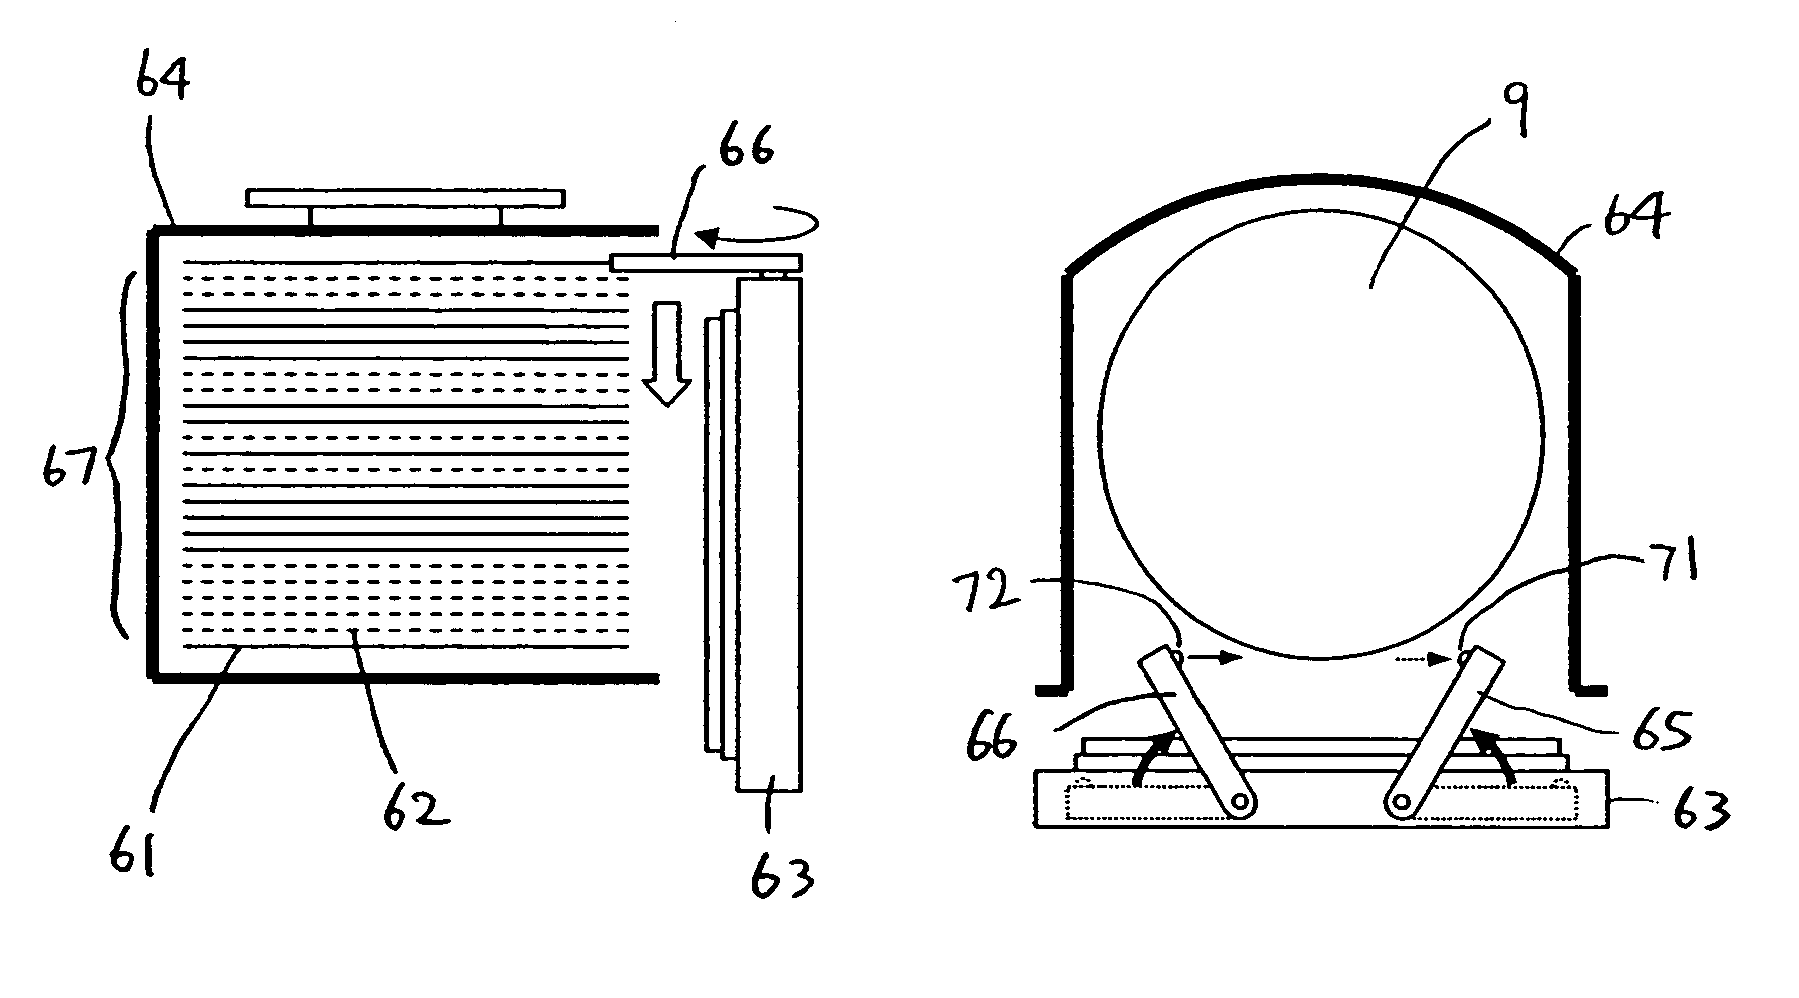 Semiconductor substrate transfer apparatus and semiconductor substrate processing apparatus equipped with the same